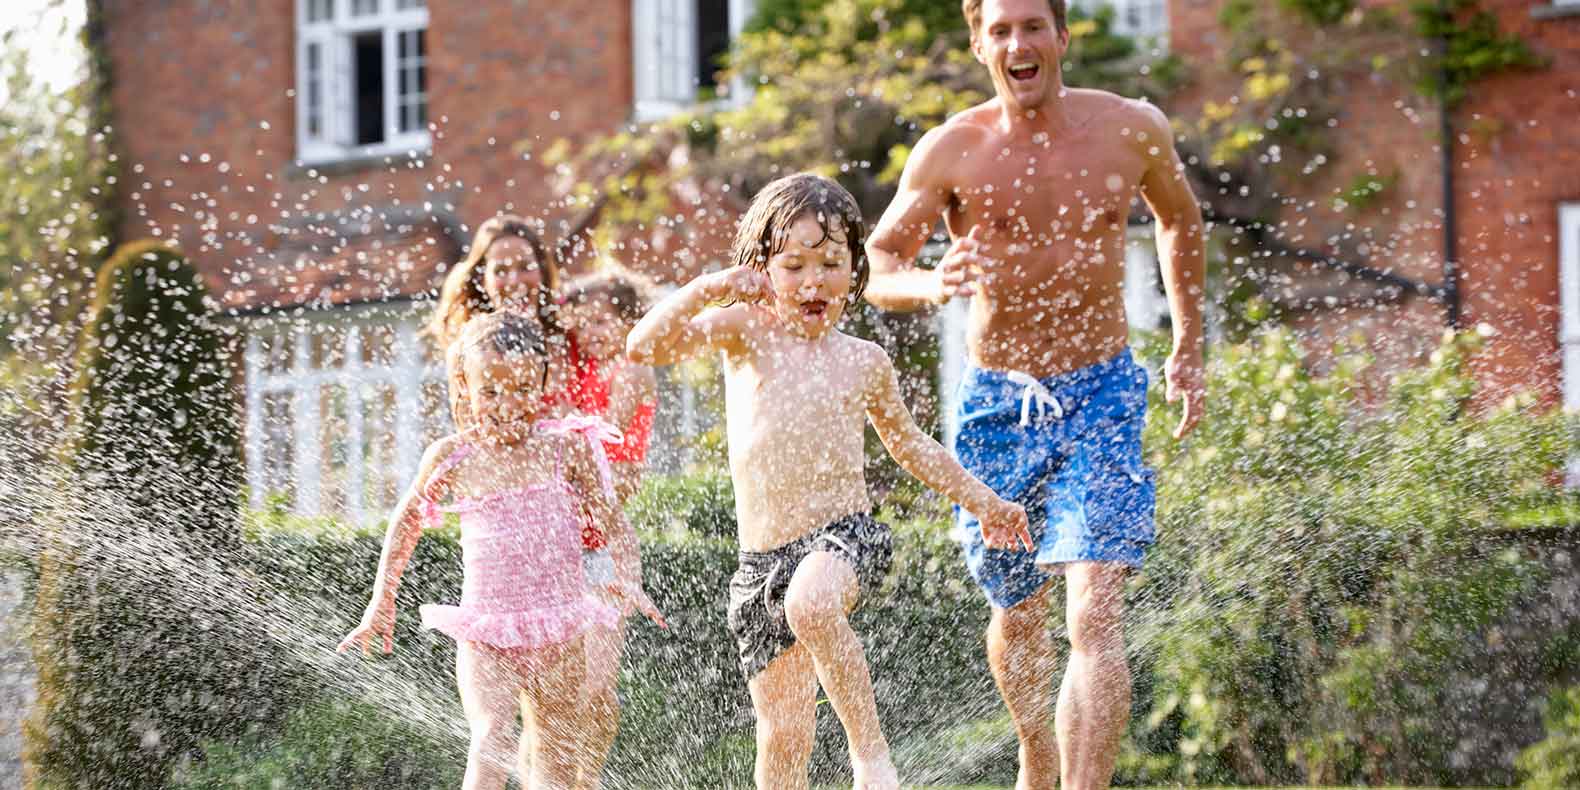 Top 3 Summer Safety Tips for Families